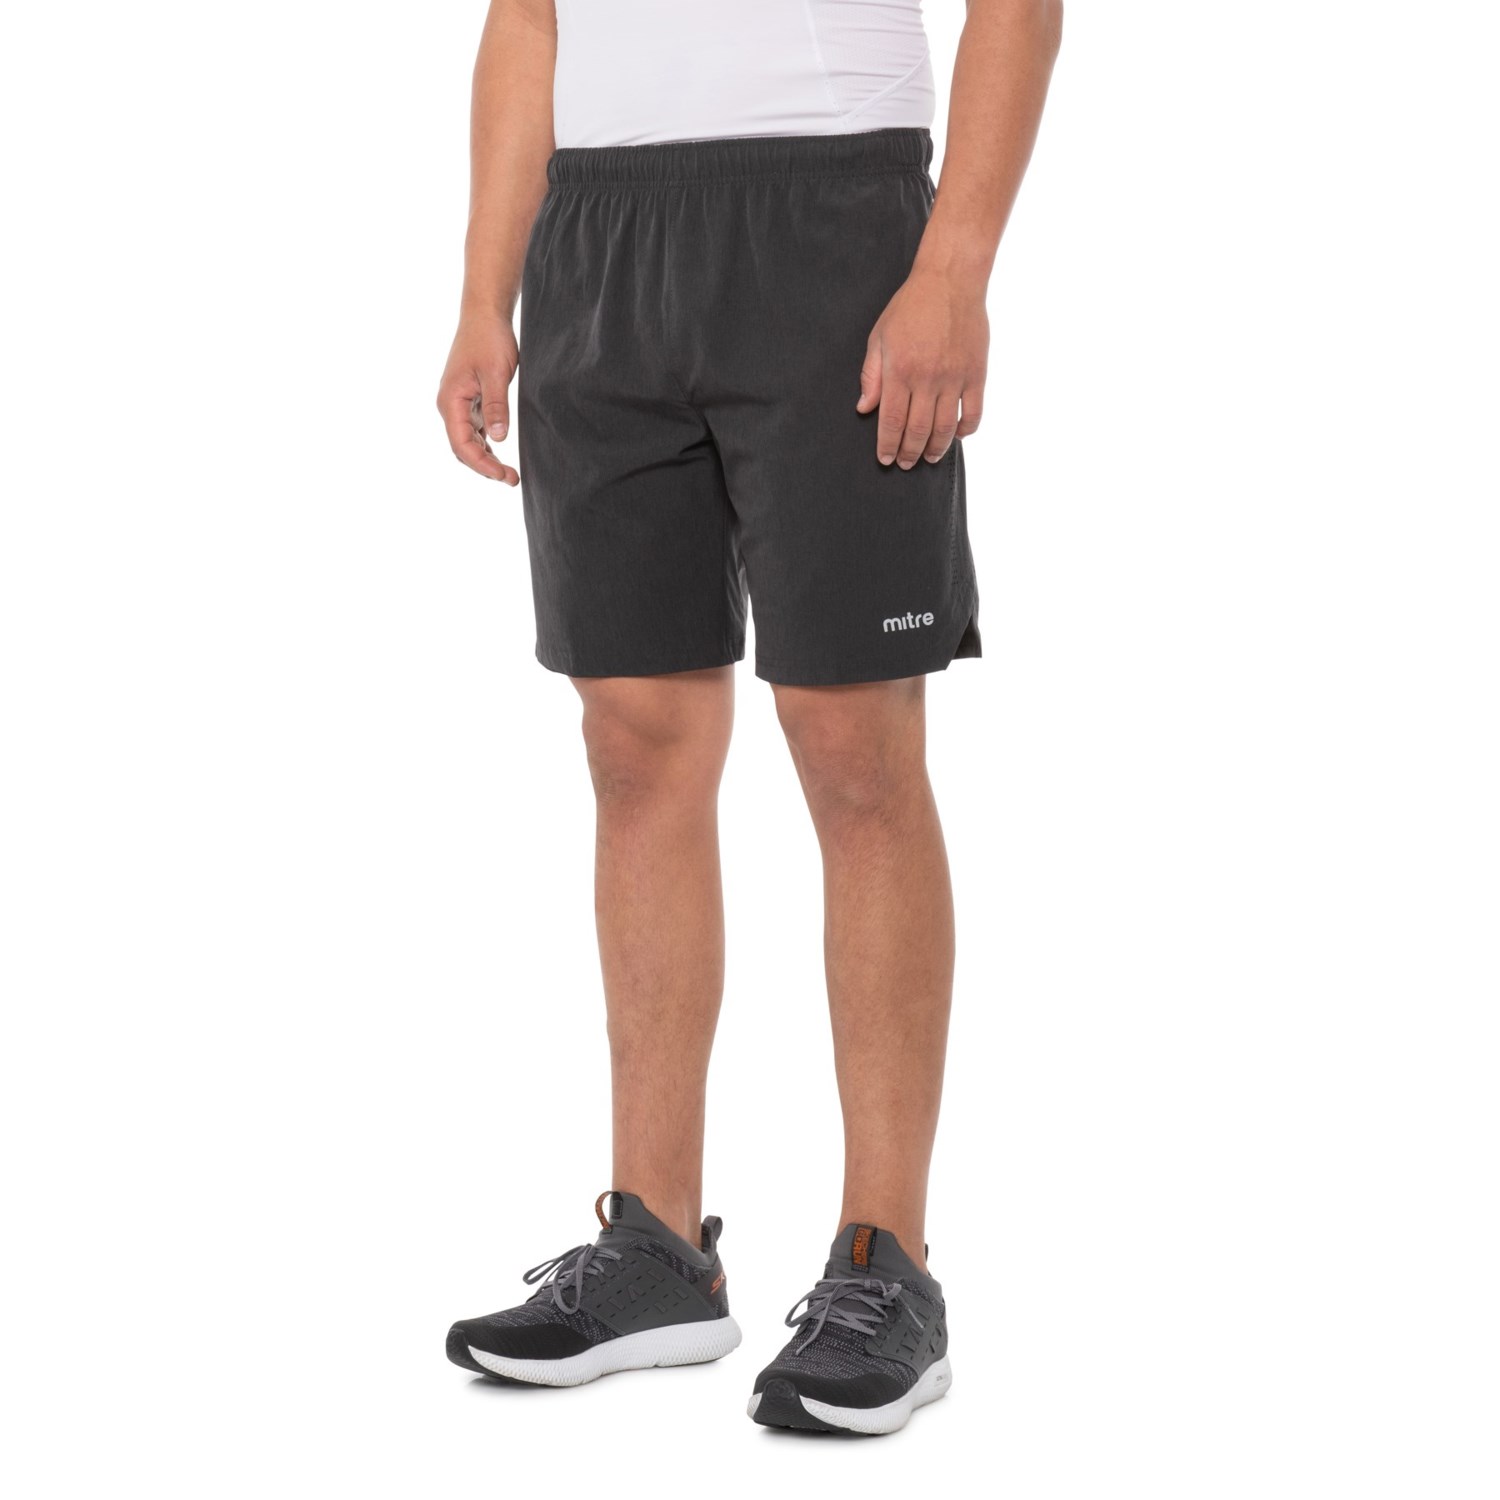 mitre Notched Leg Woven Shorts (For Men) - Save 44%